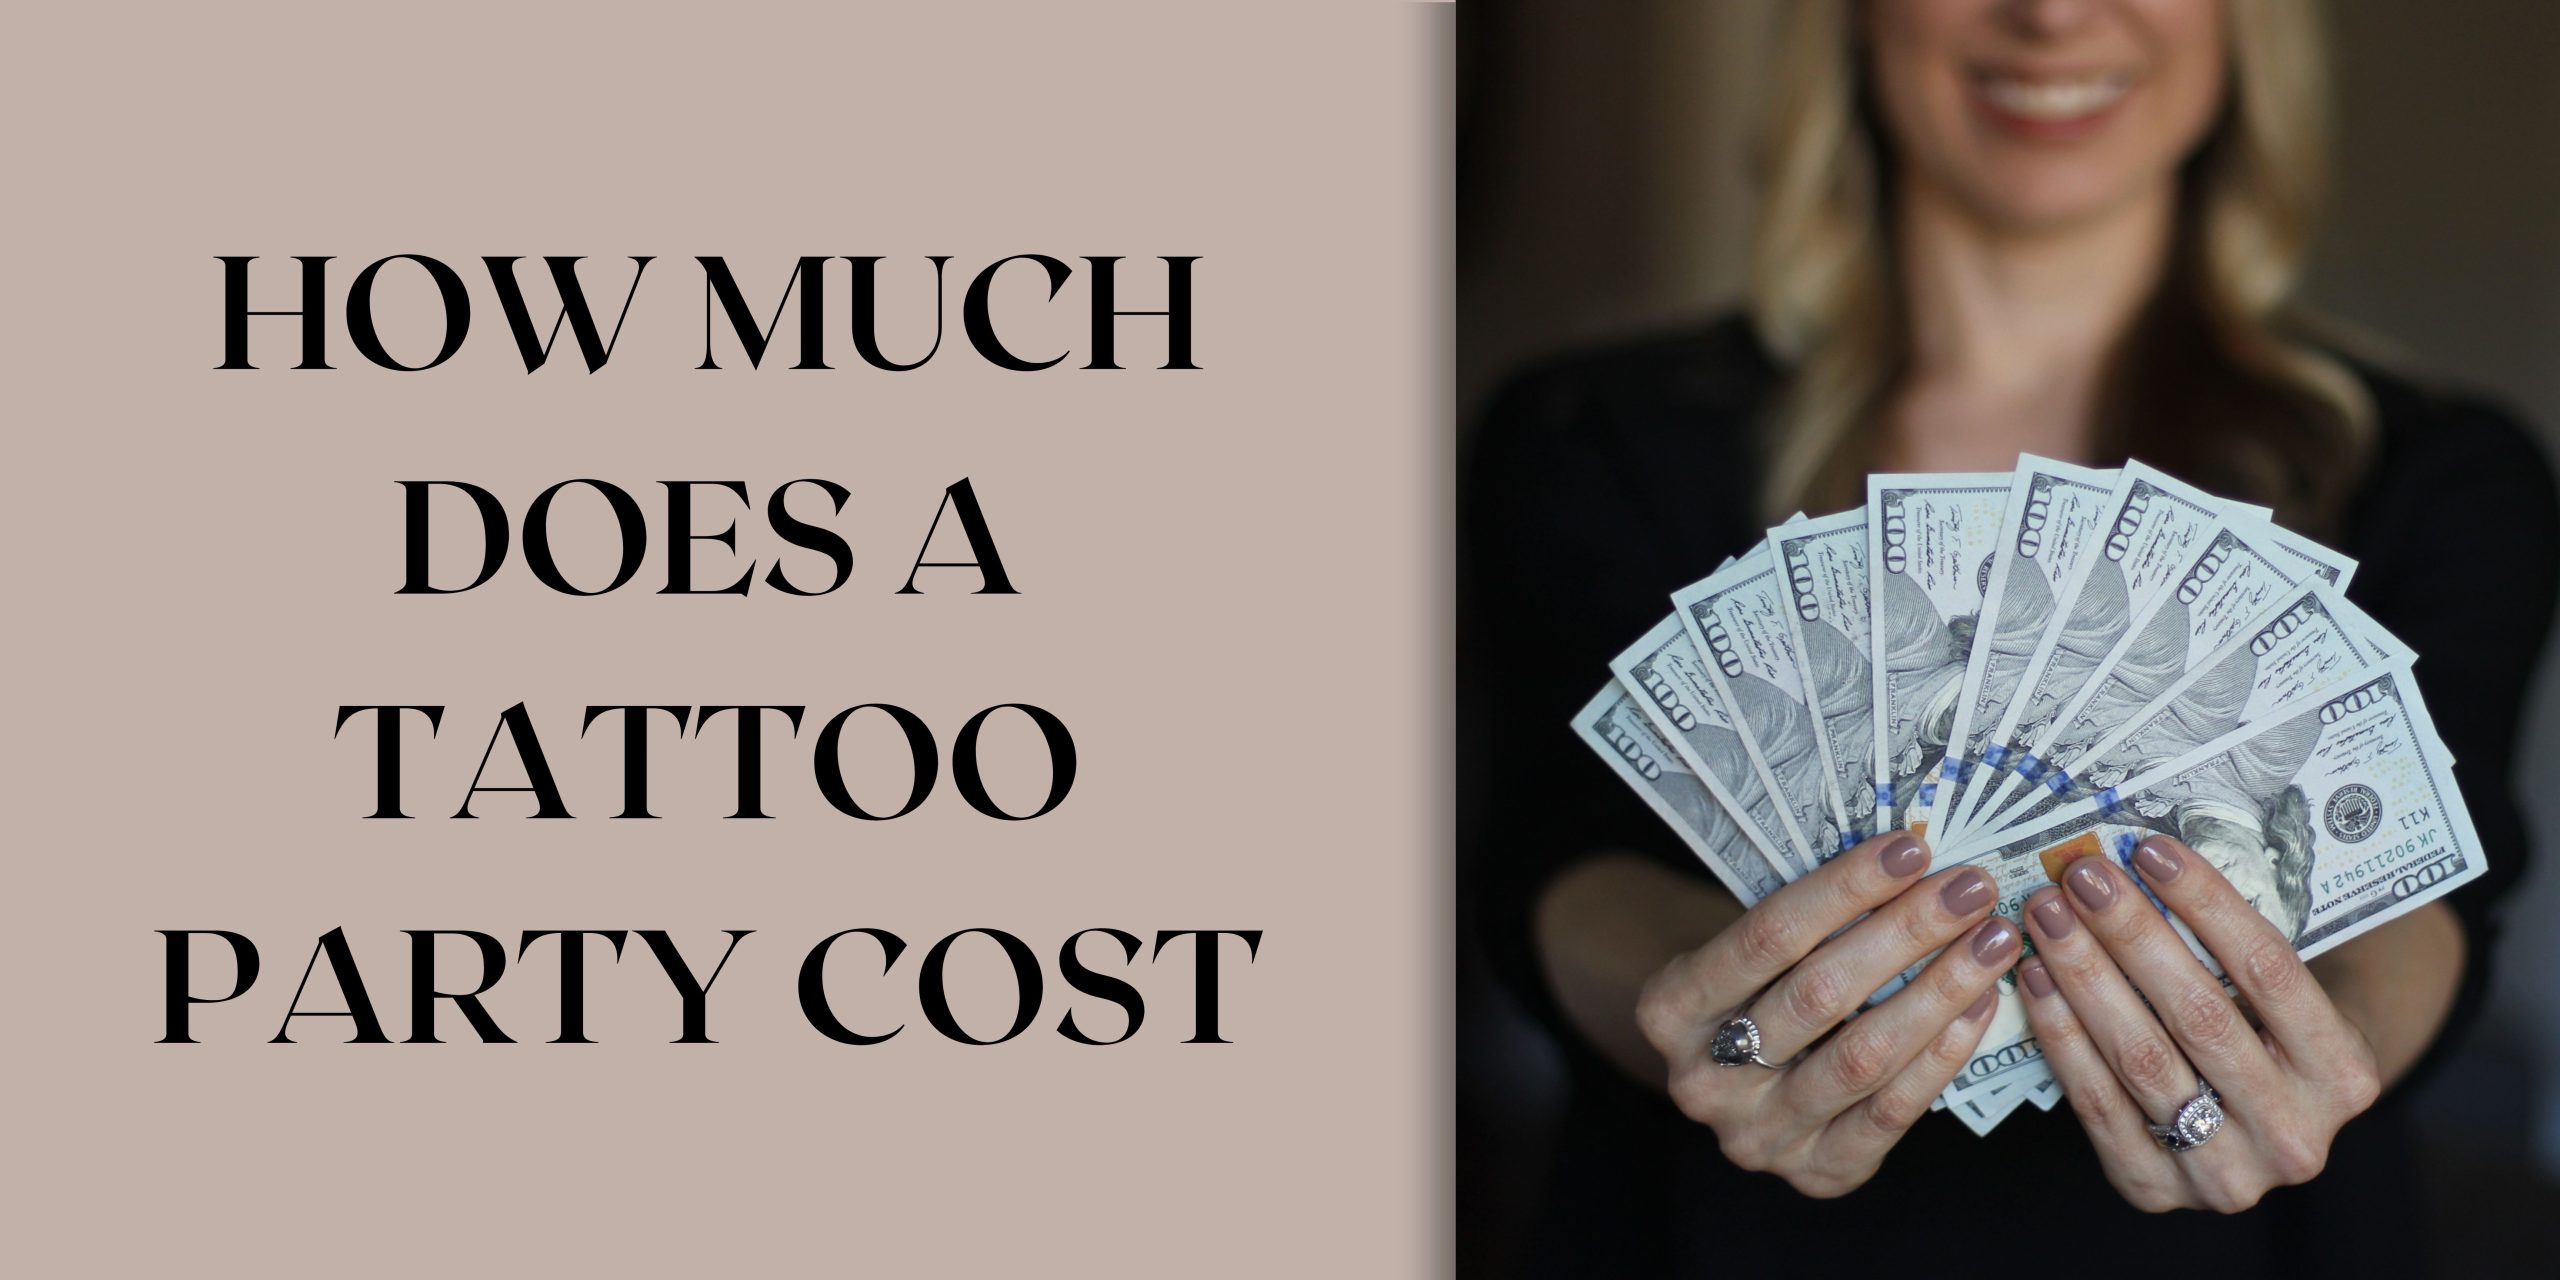 How much does a tattoo party cost